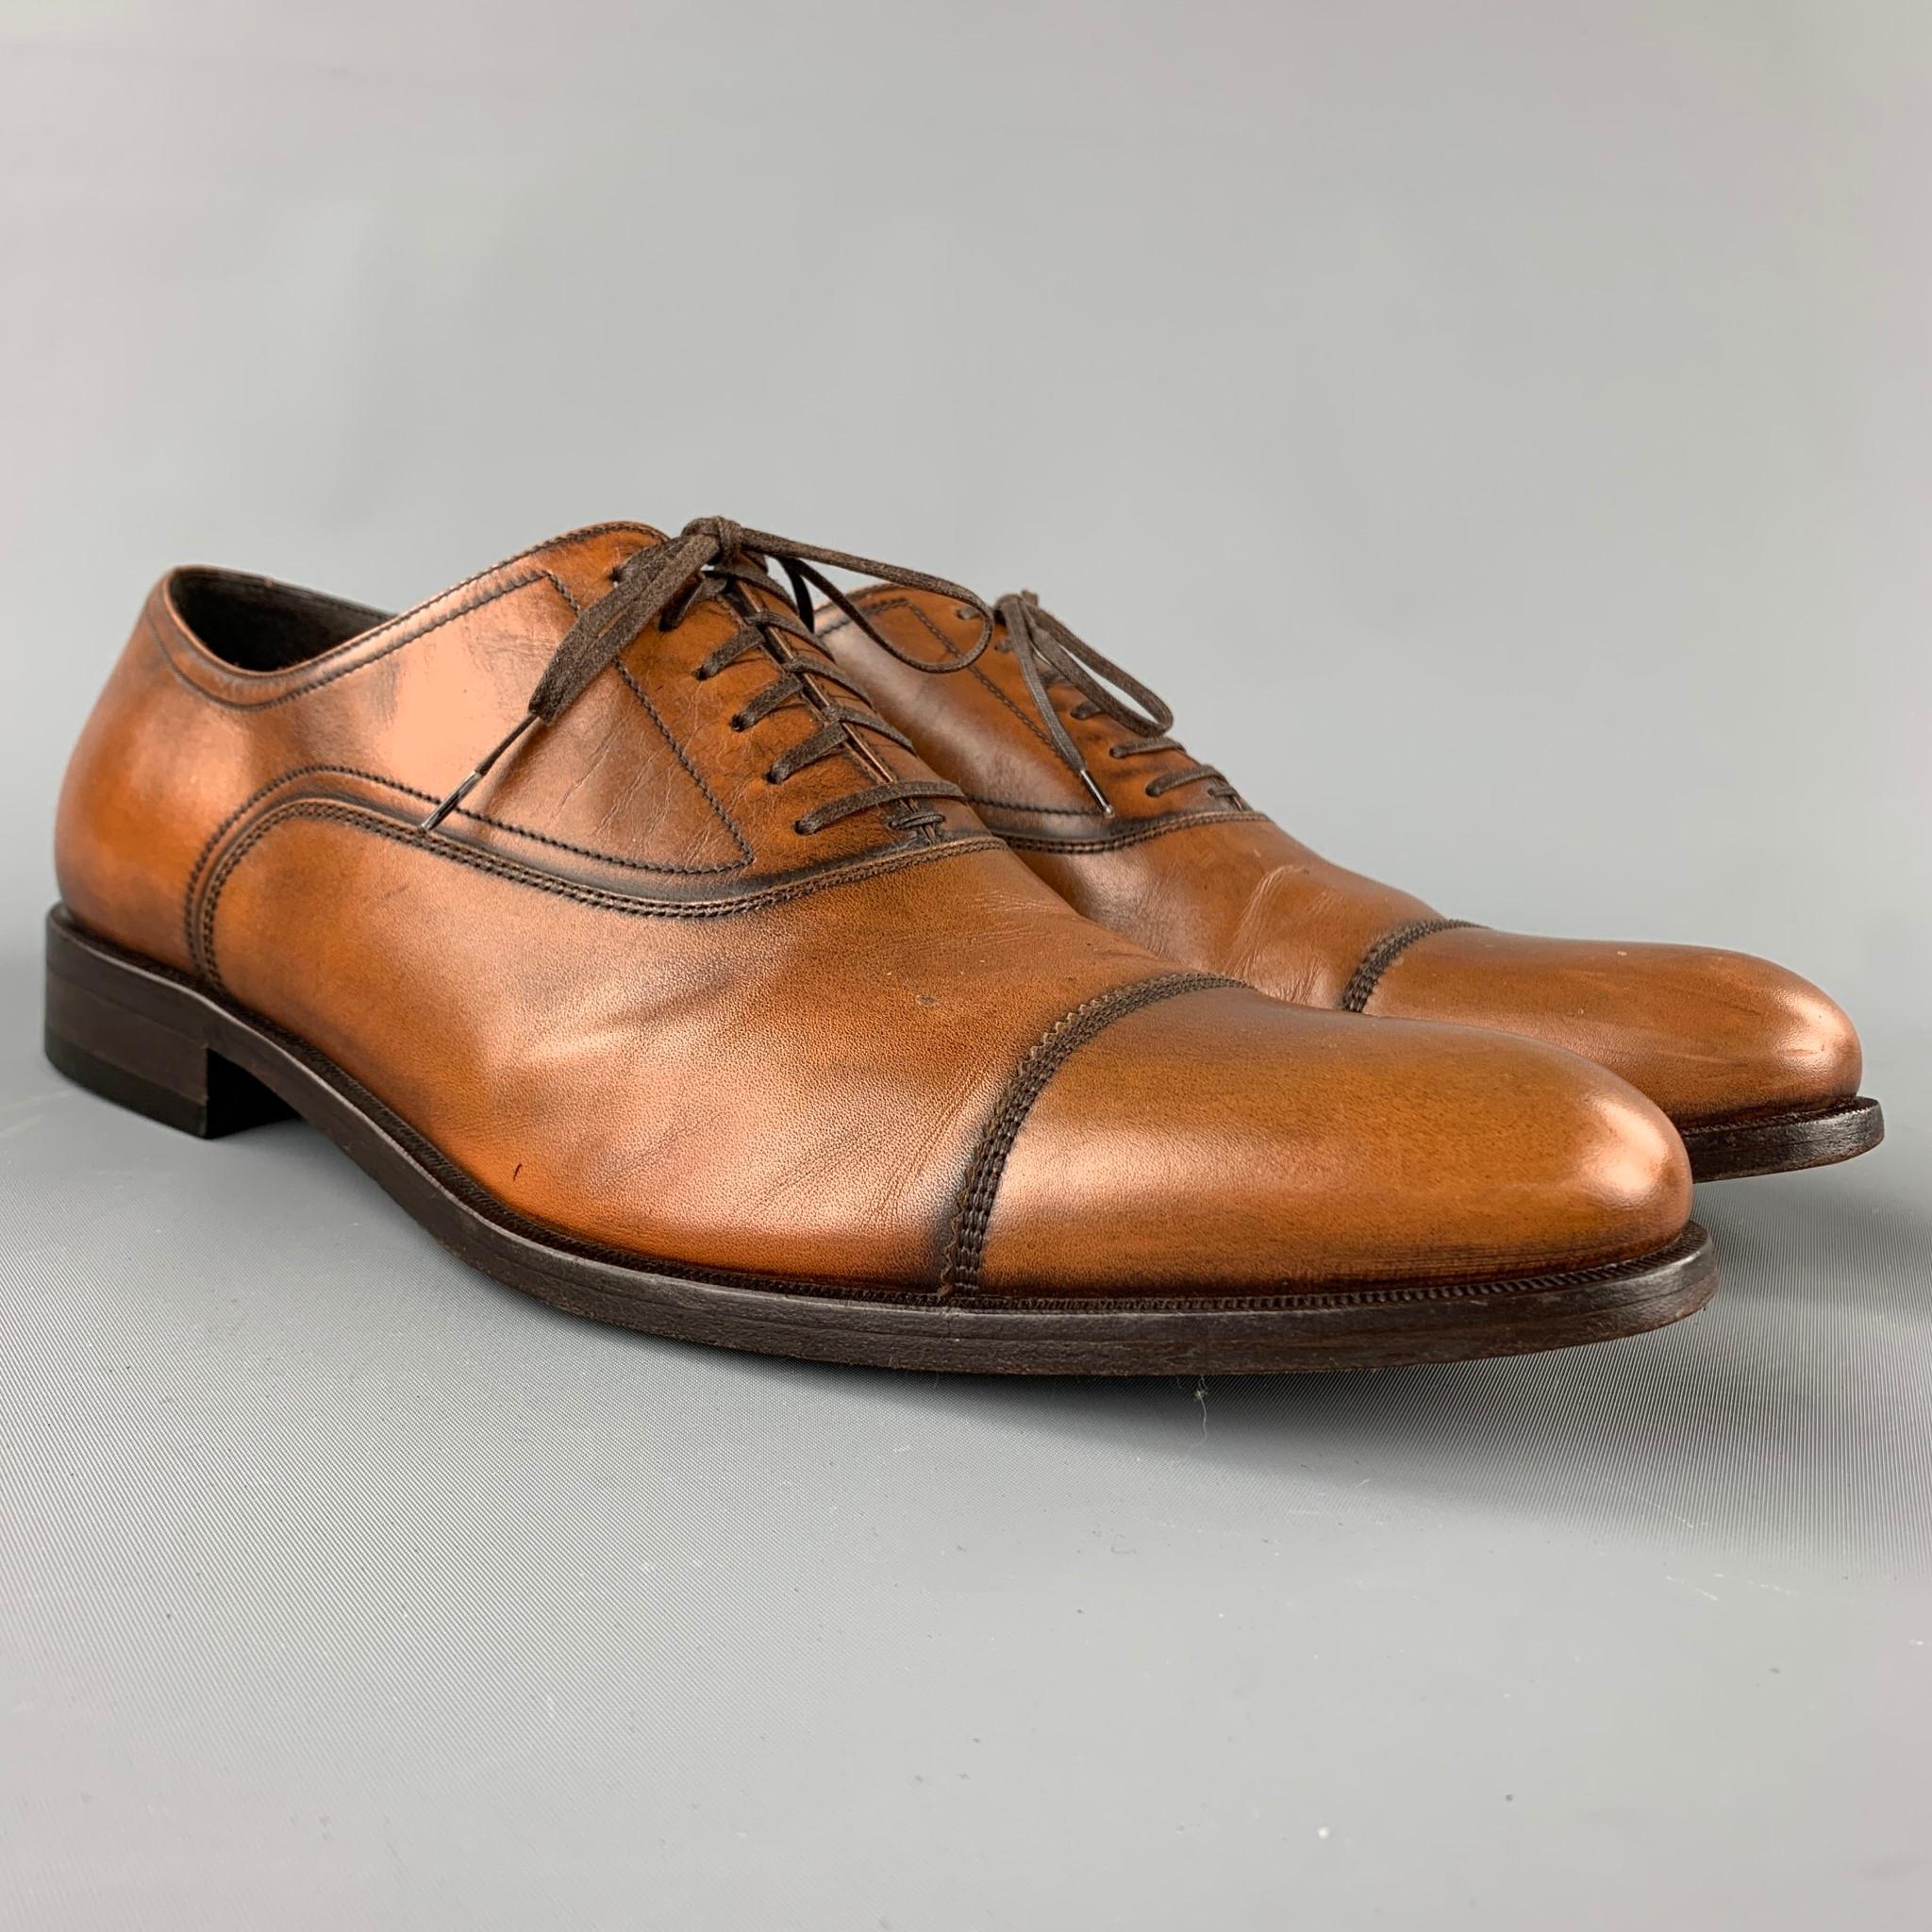 SALVATORE FERRAGAMO shoes comes in a tan antique leather featuring a cap toe, wooden sole, and a lace up closure. Made in Italy.

Good Pre-Owned Condition.
Marked: 12 D

Measurements:

13 in. x 4 in.
 